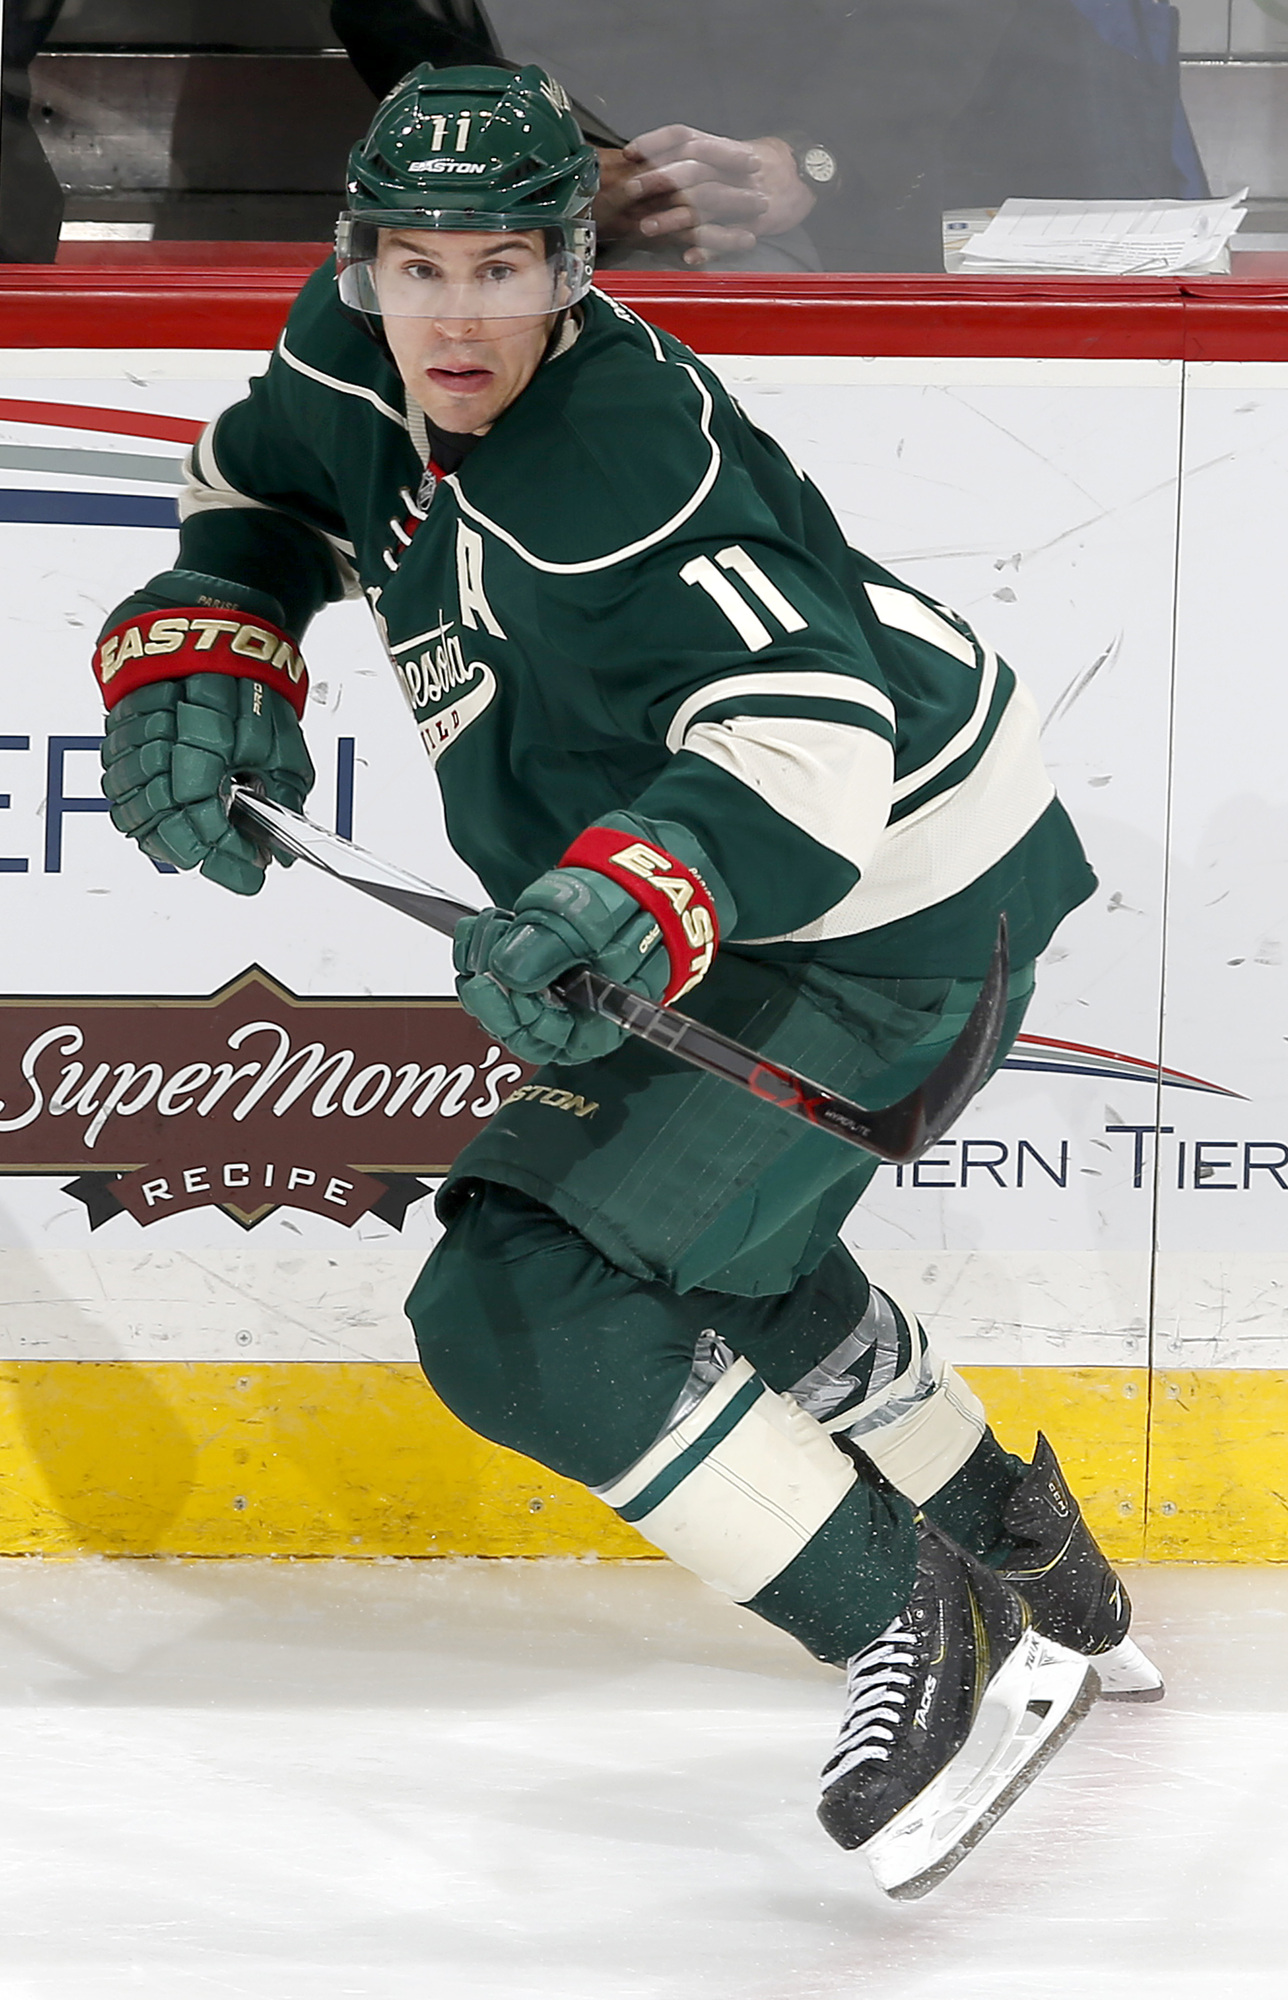 Expect Zach Parise, Ryan Suter, Islanders links to ramp up this